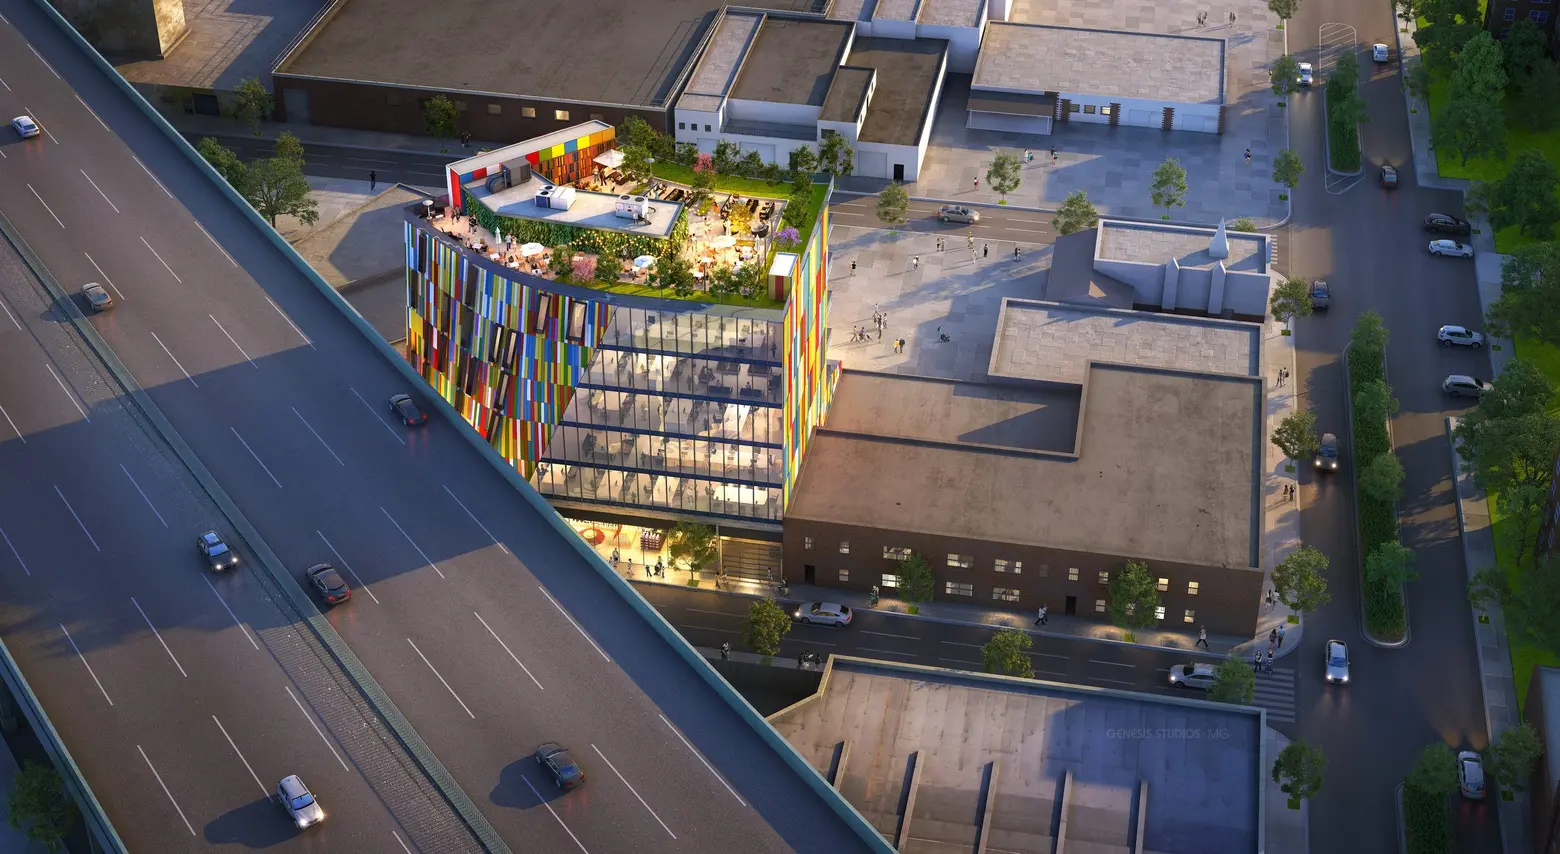 Albo Liberis’ Red Hook office concept proposes a colorful kaleidoscope next to the BQE